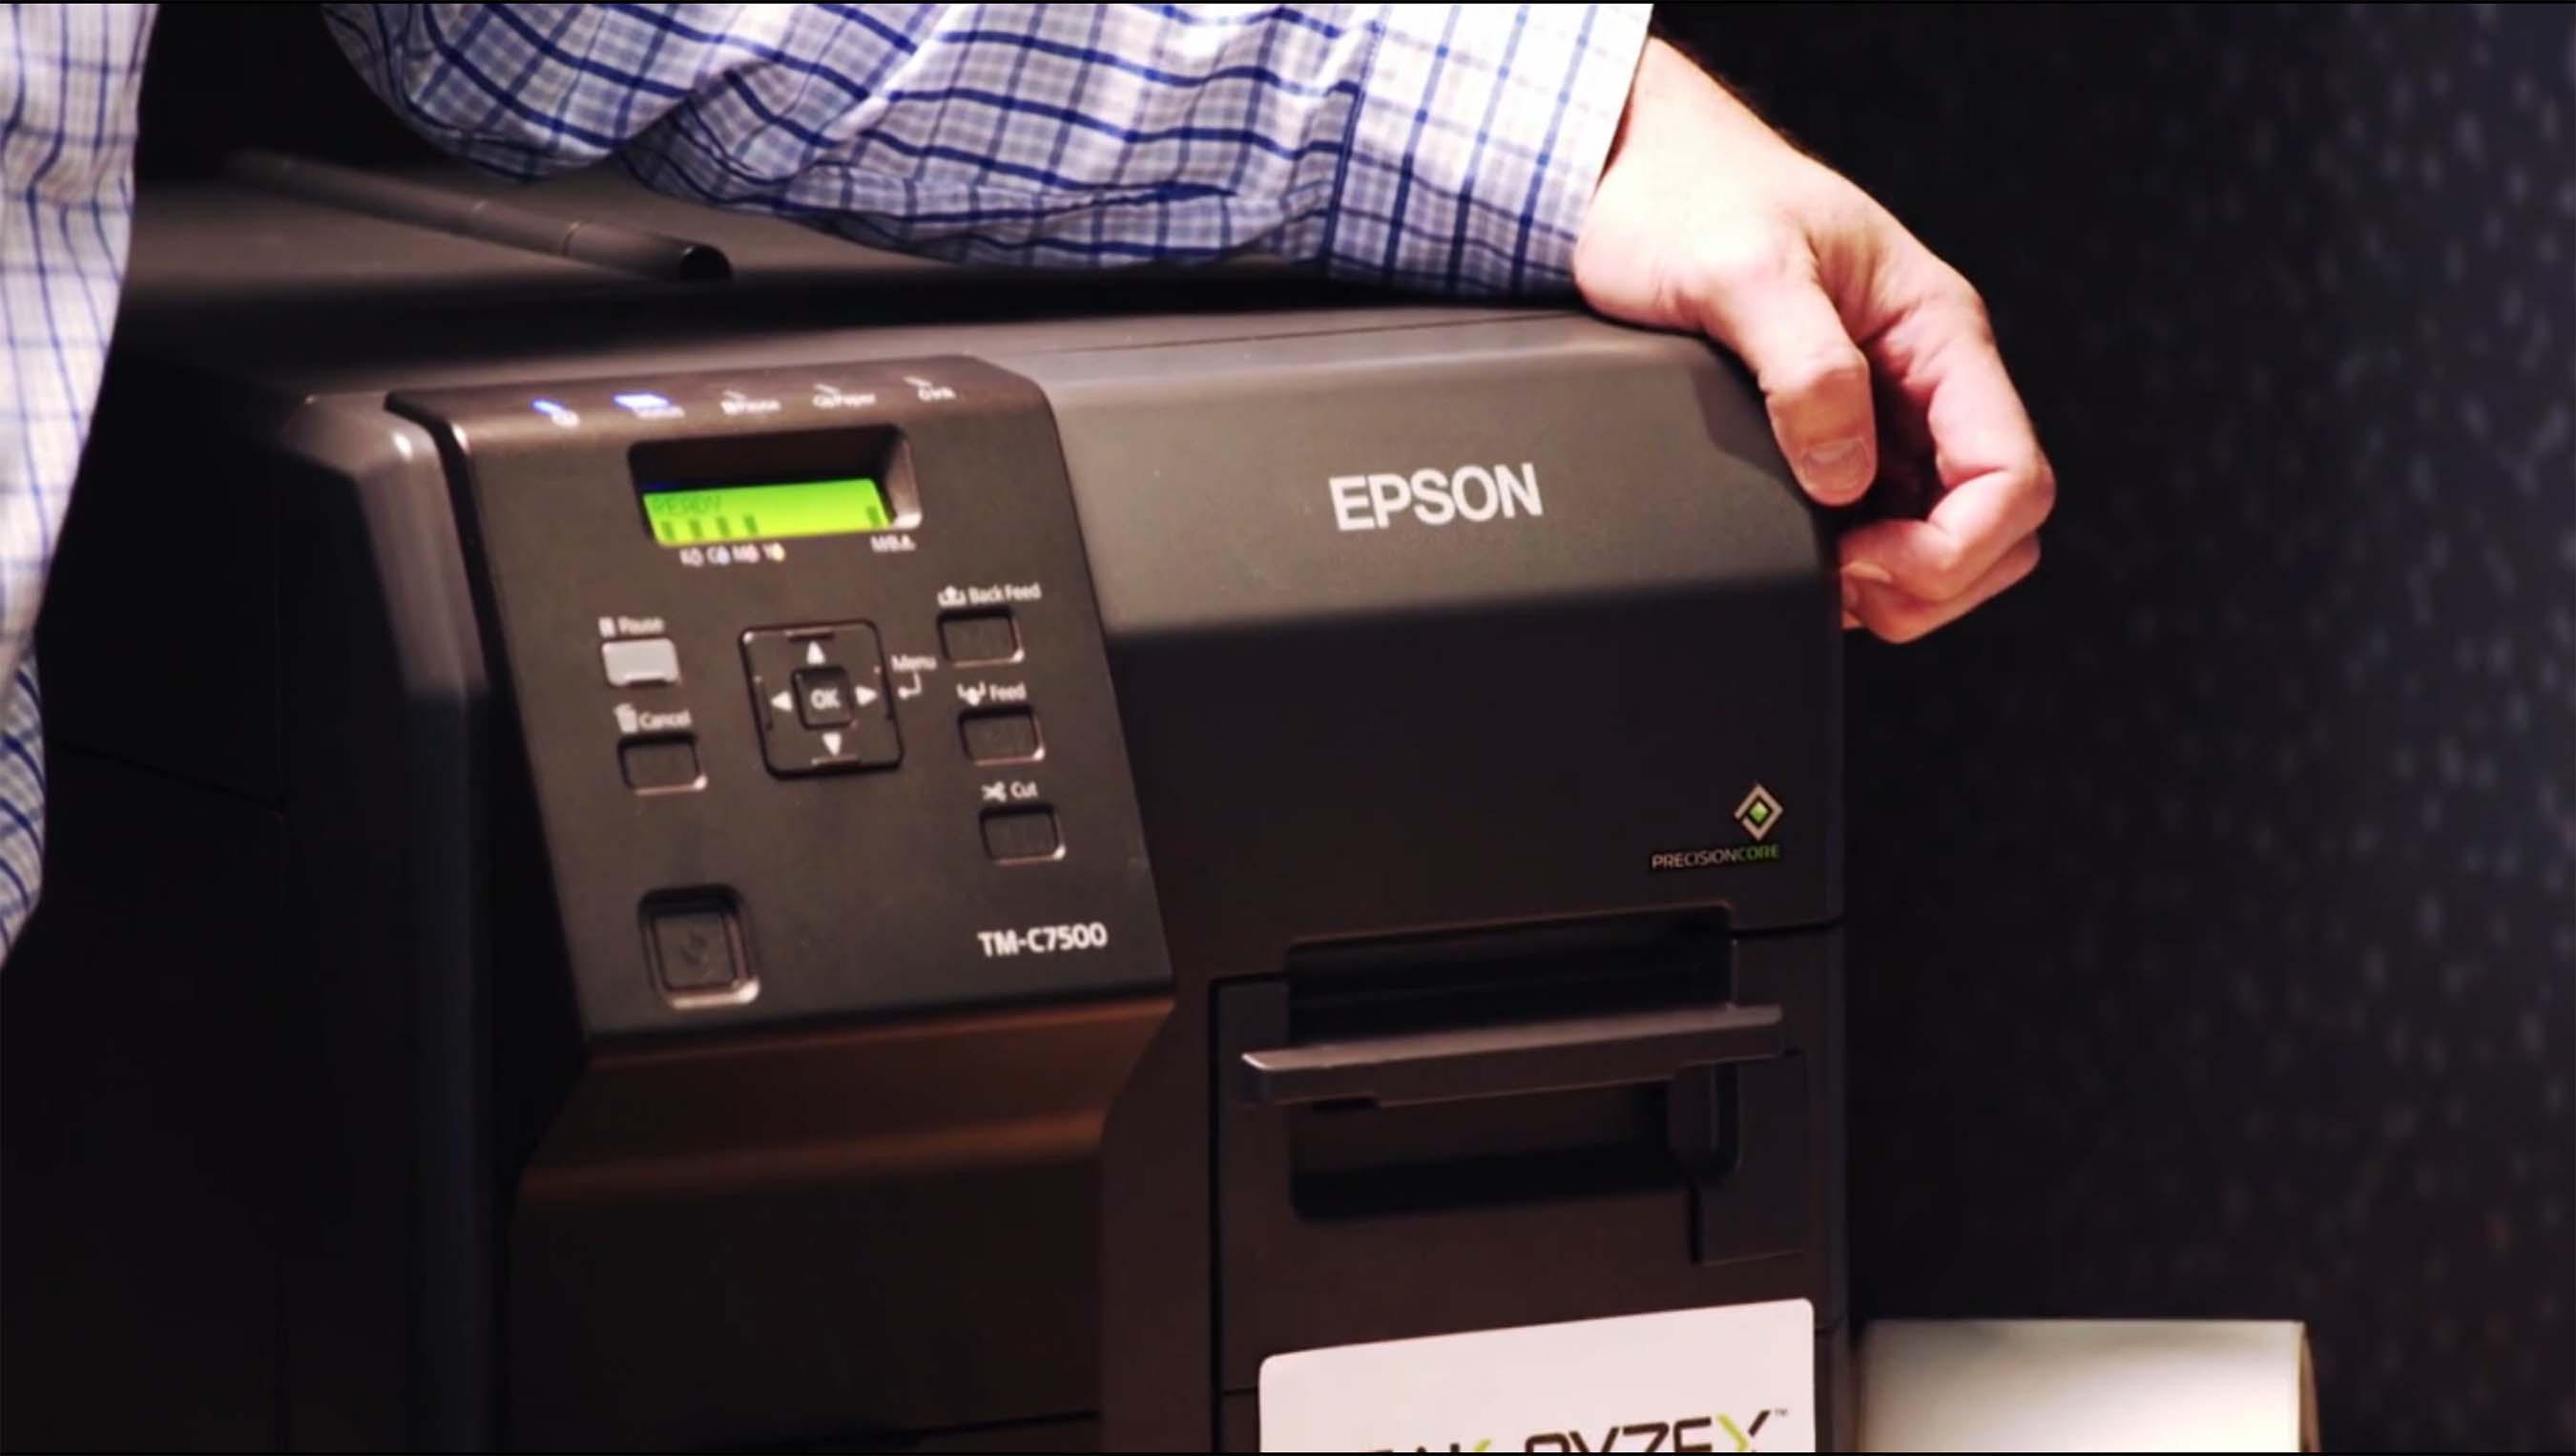 A close up of Millstone Medical’s Epson’s ColorWorks C7500G inkjet label printer